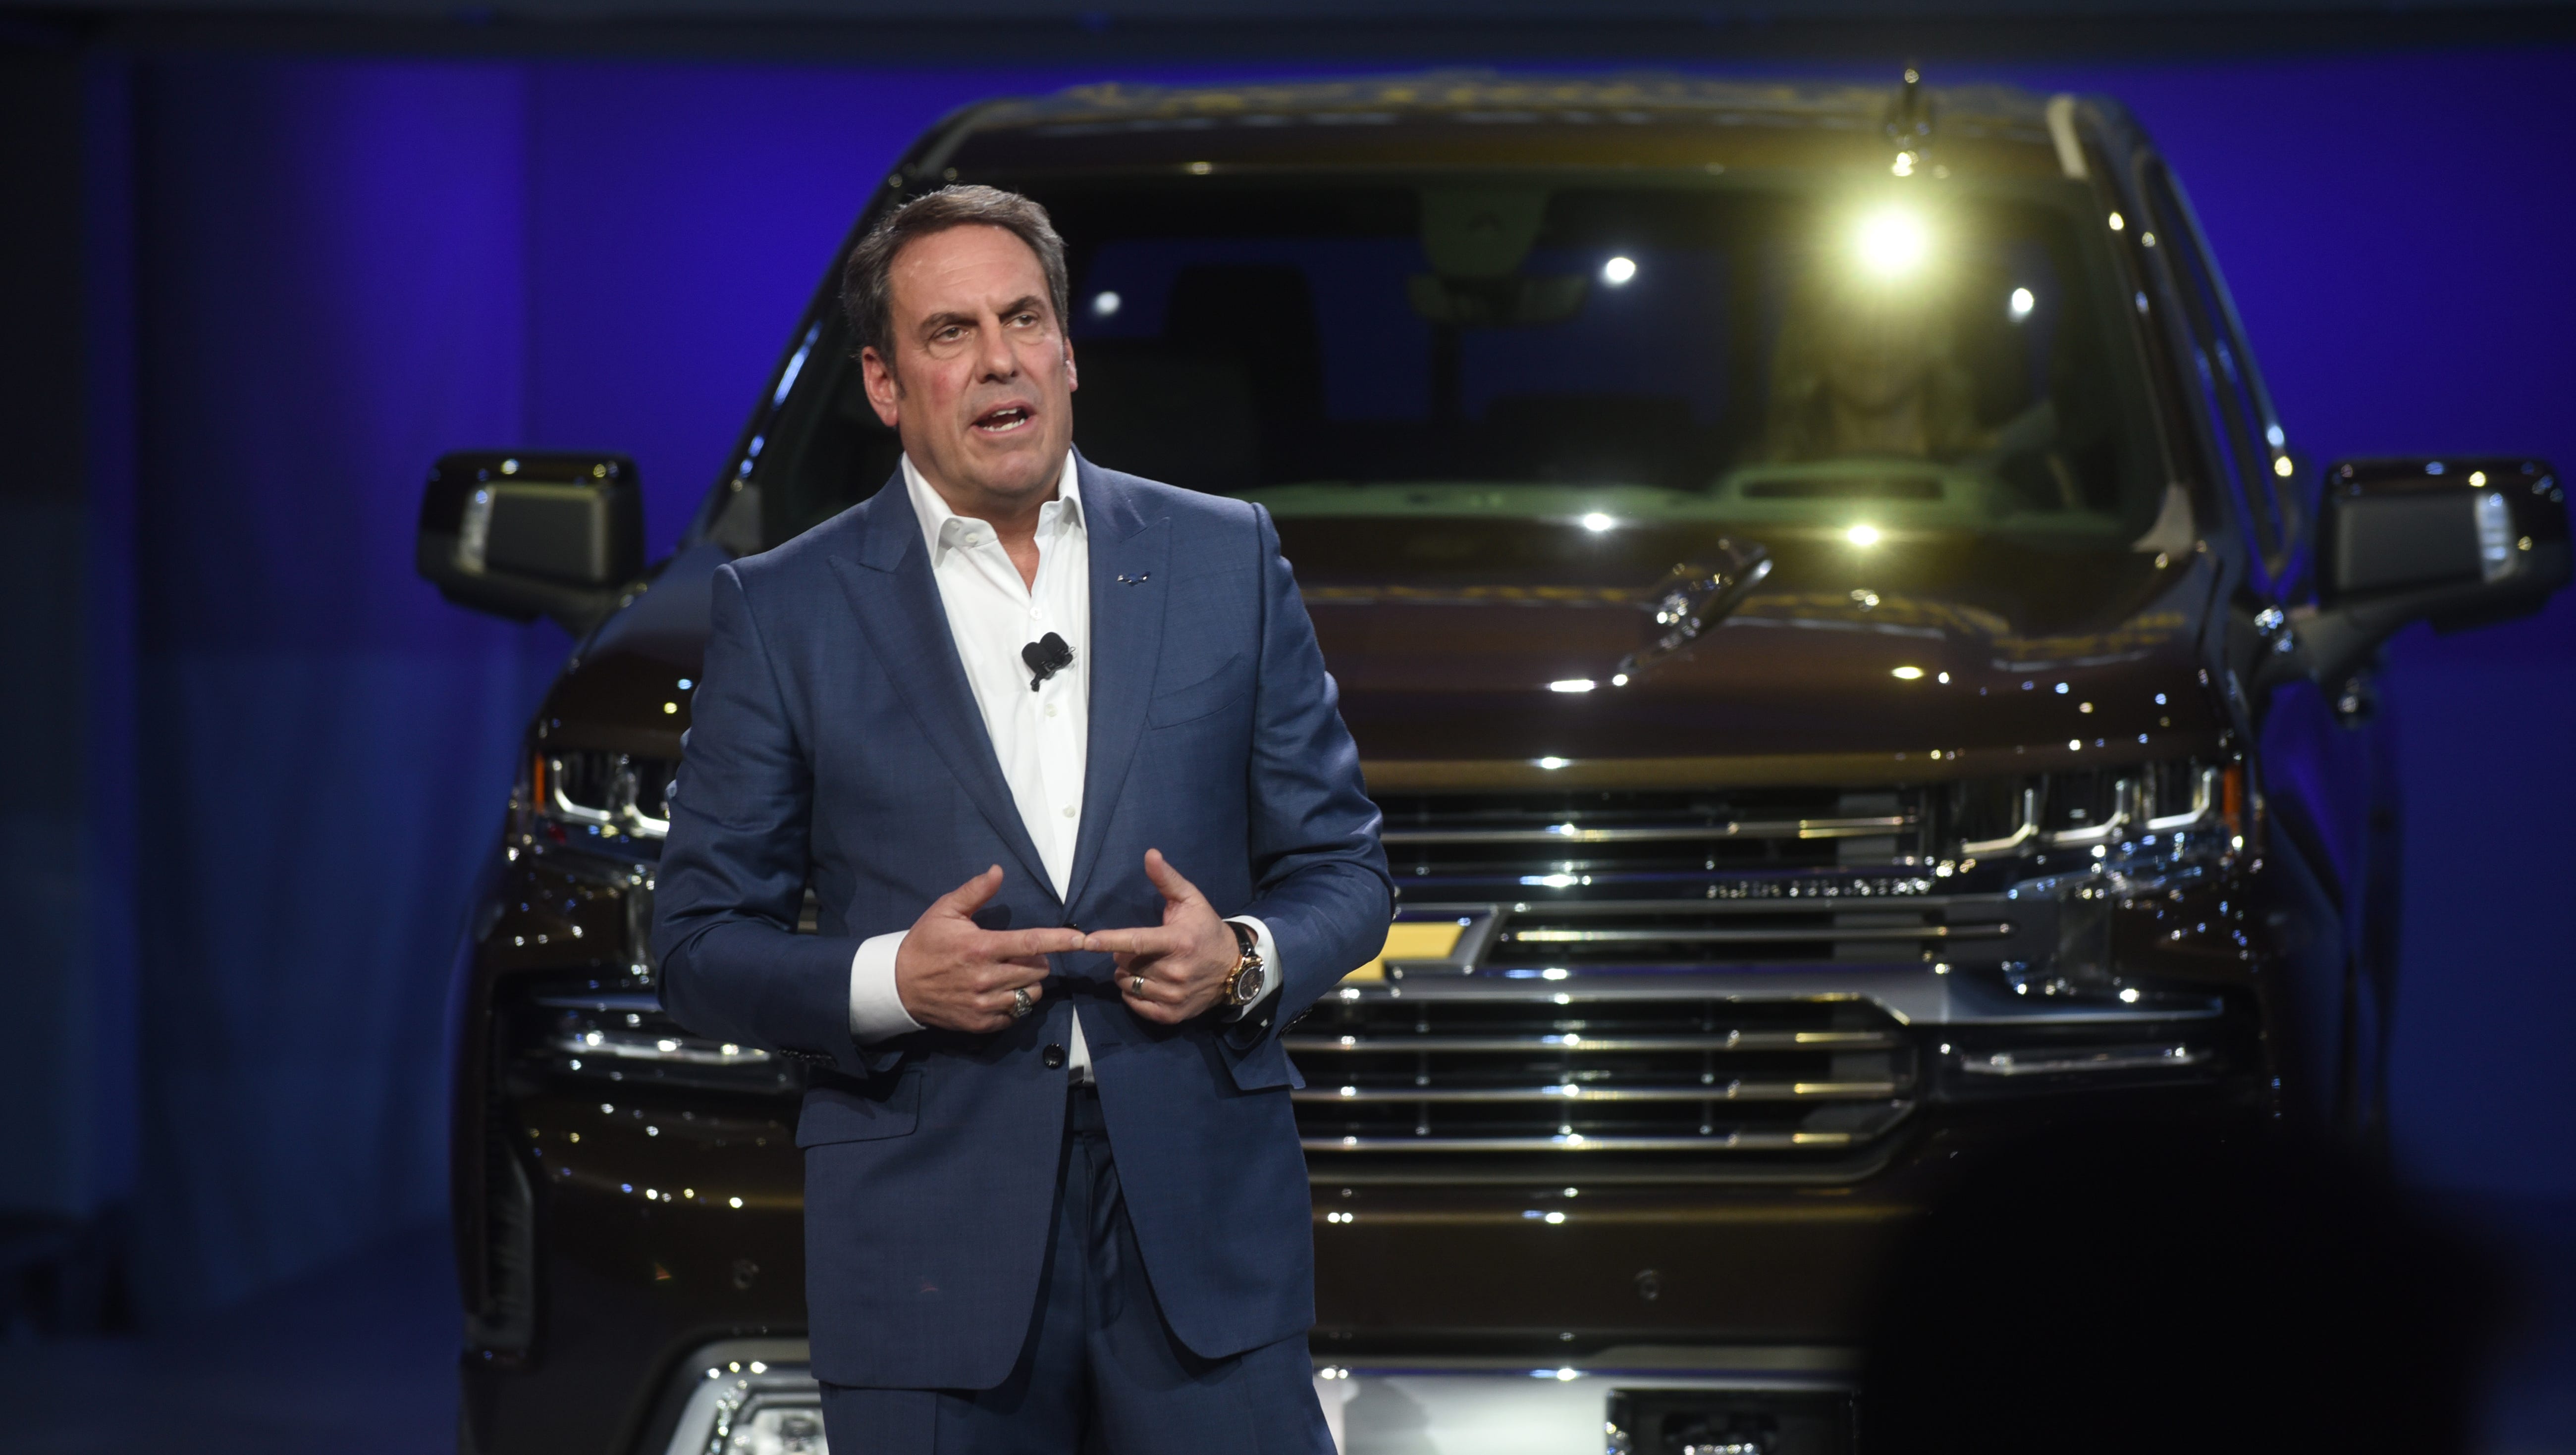 Mark Reuss, Executive VP Global Product Development, GM, talks about the 2019 Chevy Silverado High Country edition.